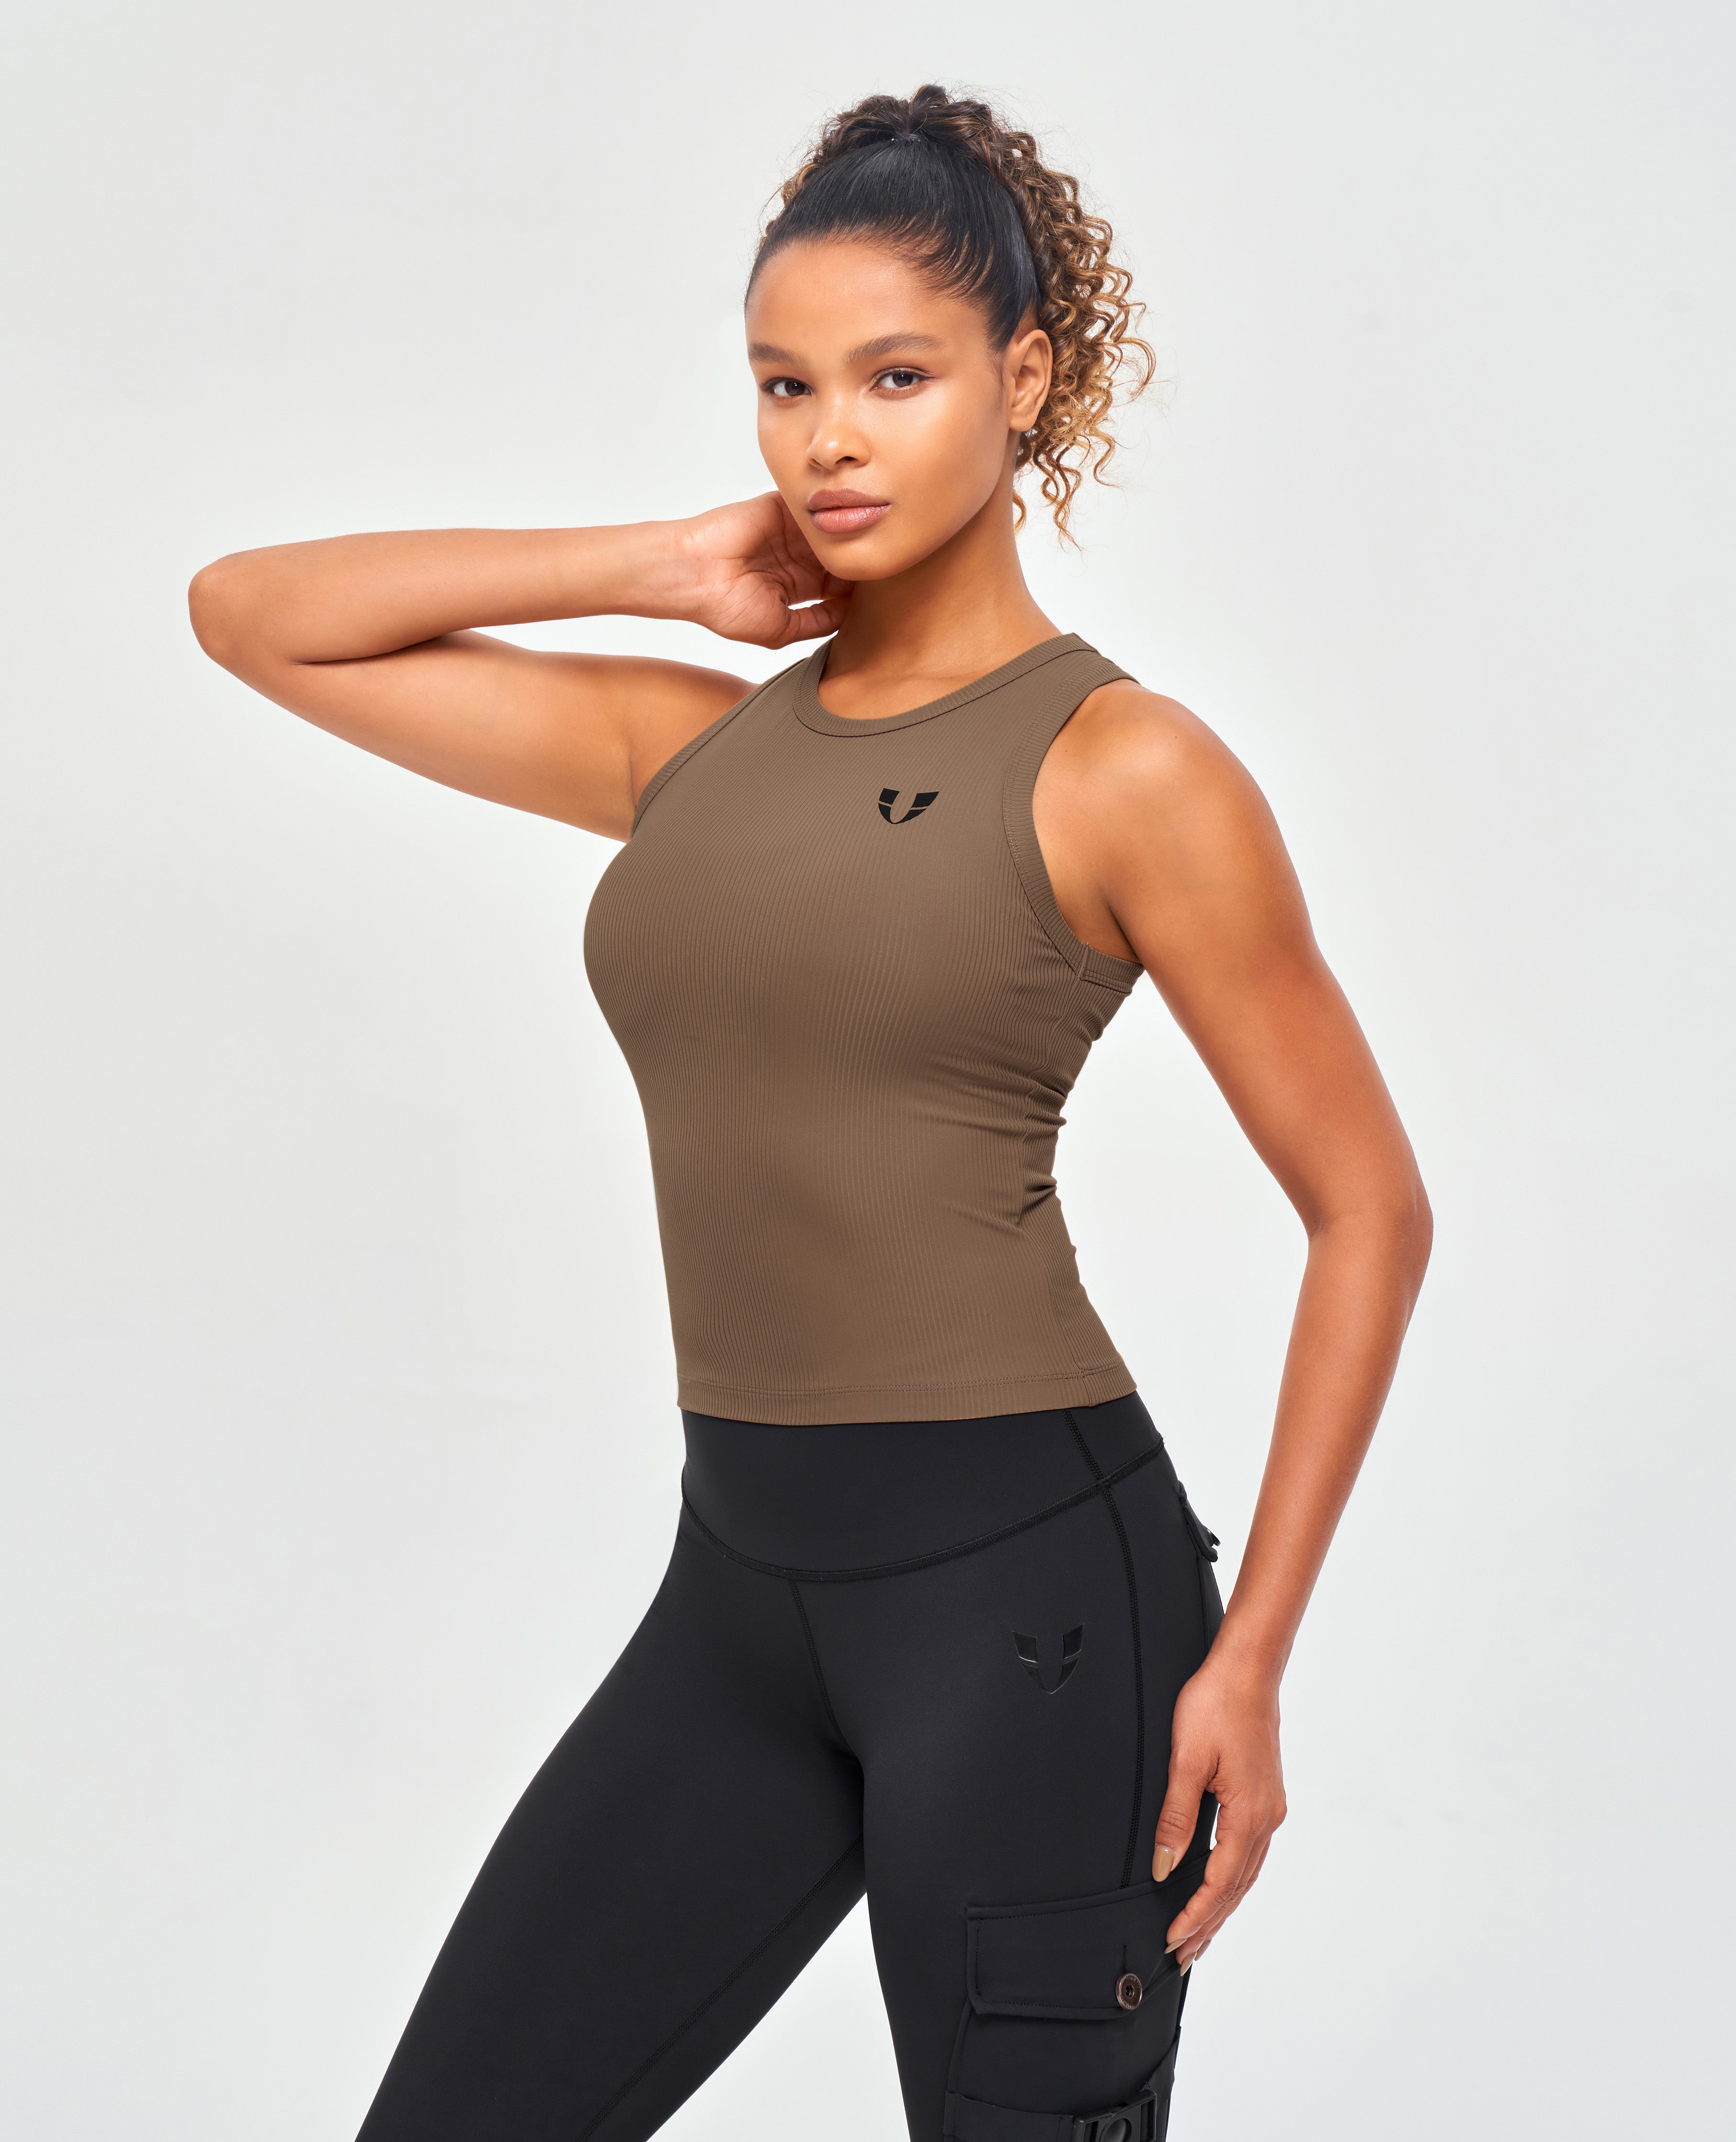 Ribbed Workout Tank - Nut Brown